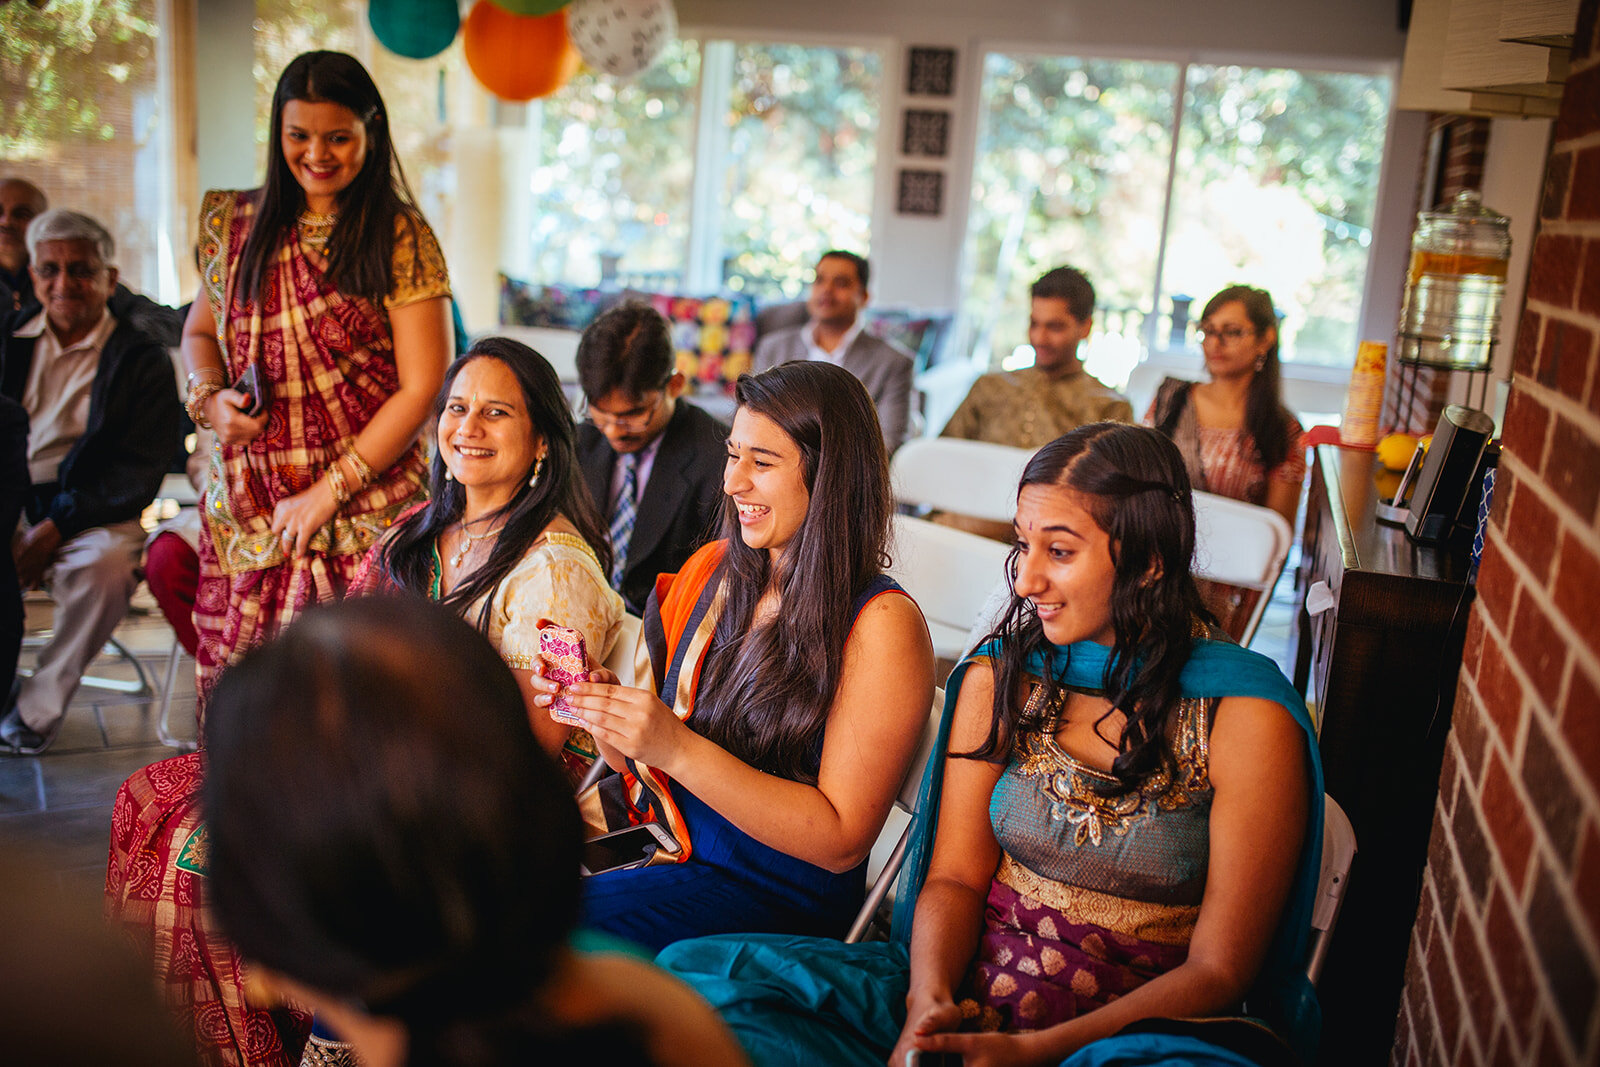 Guests at Indian wedding ceremony in Richmond VA Shawnee Custalow photography